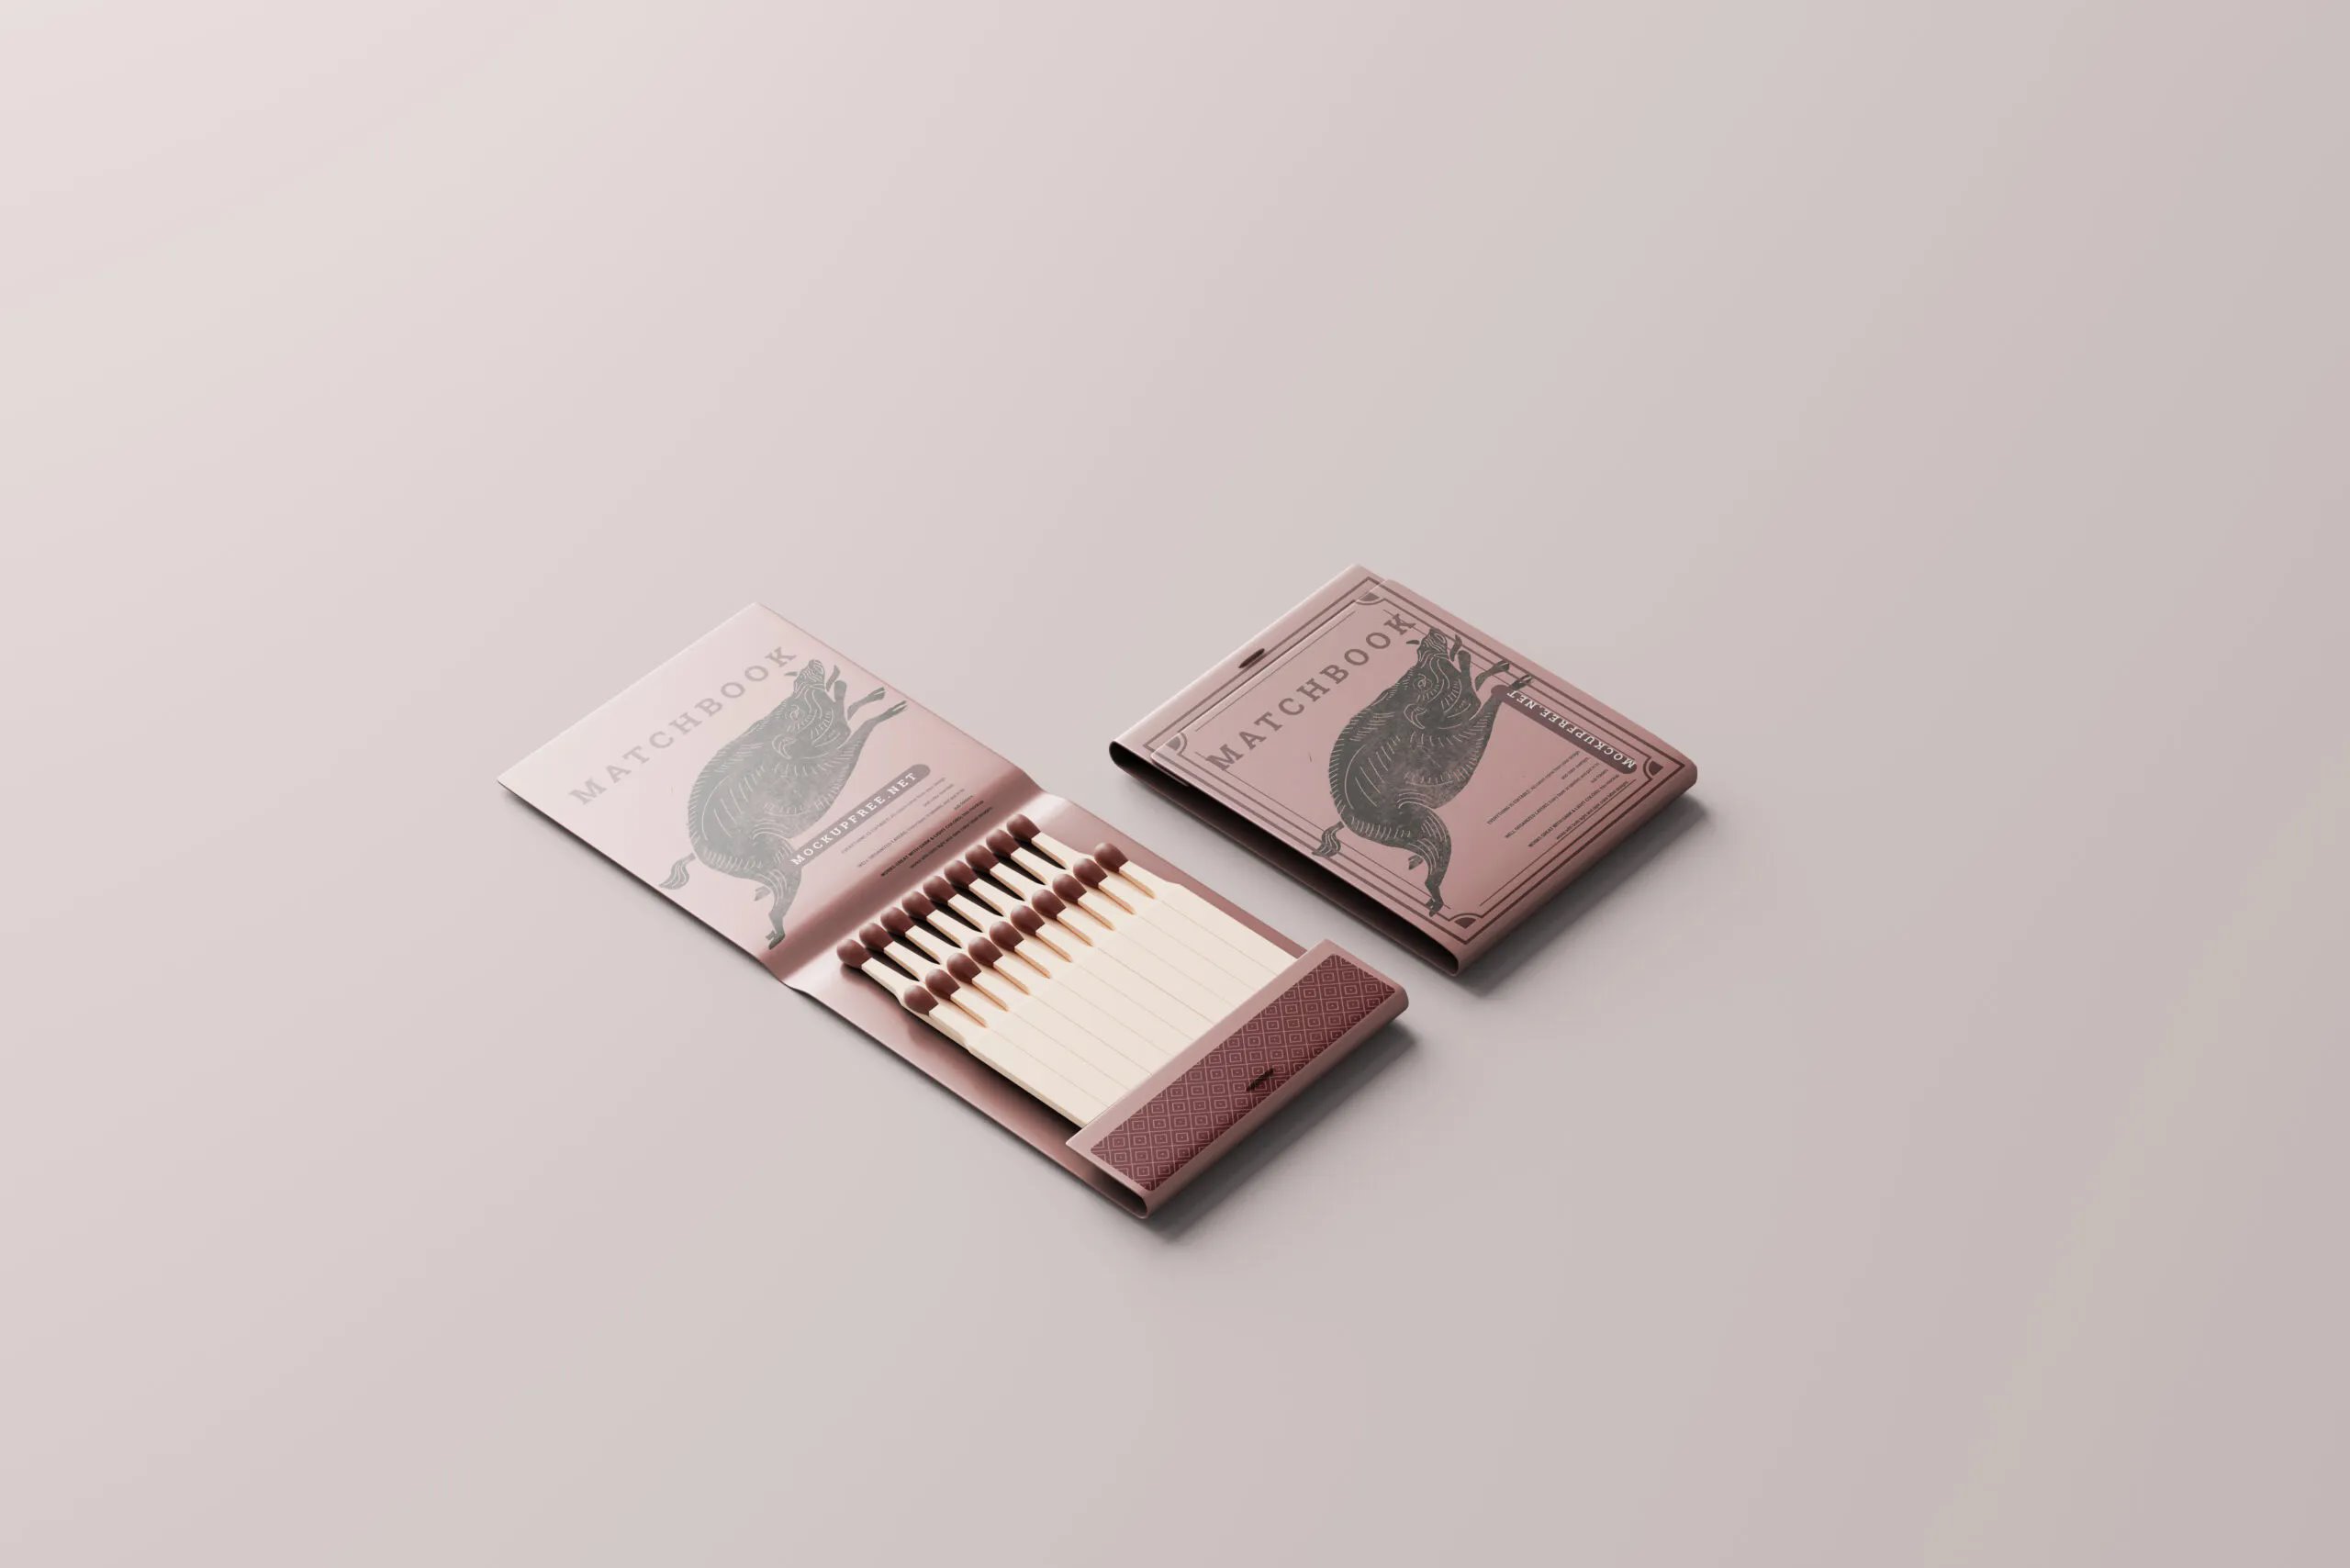 5 Matchbook Mockups in Top and Perspective Visions FREE PSD